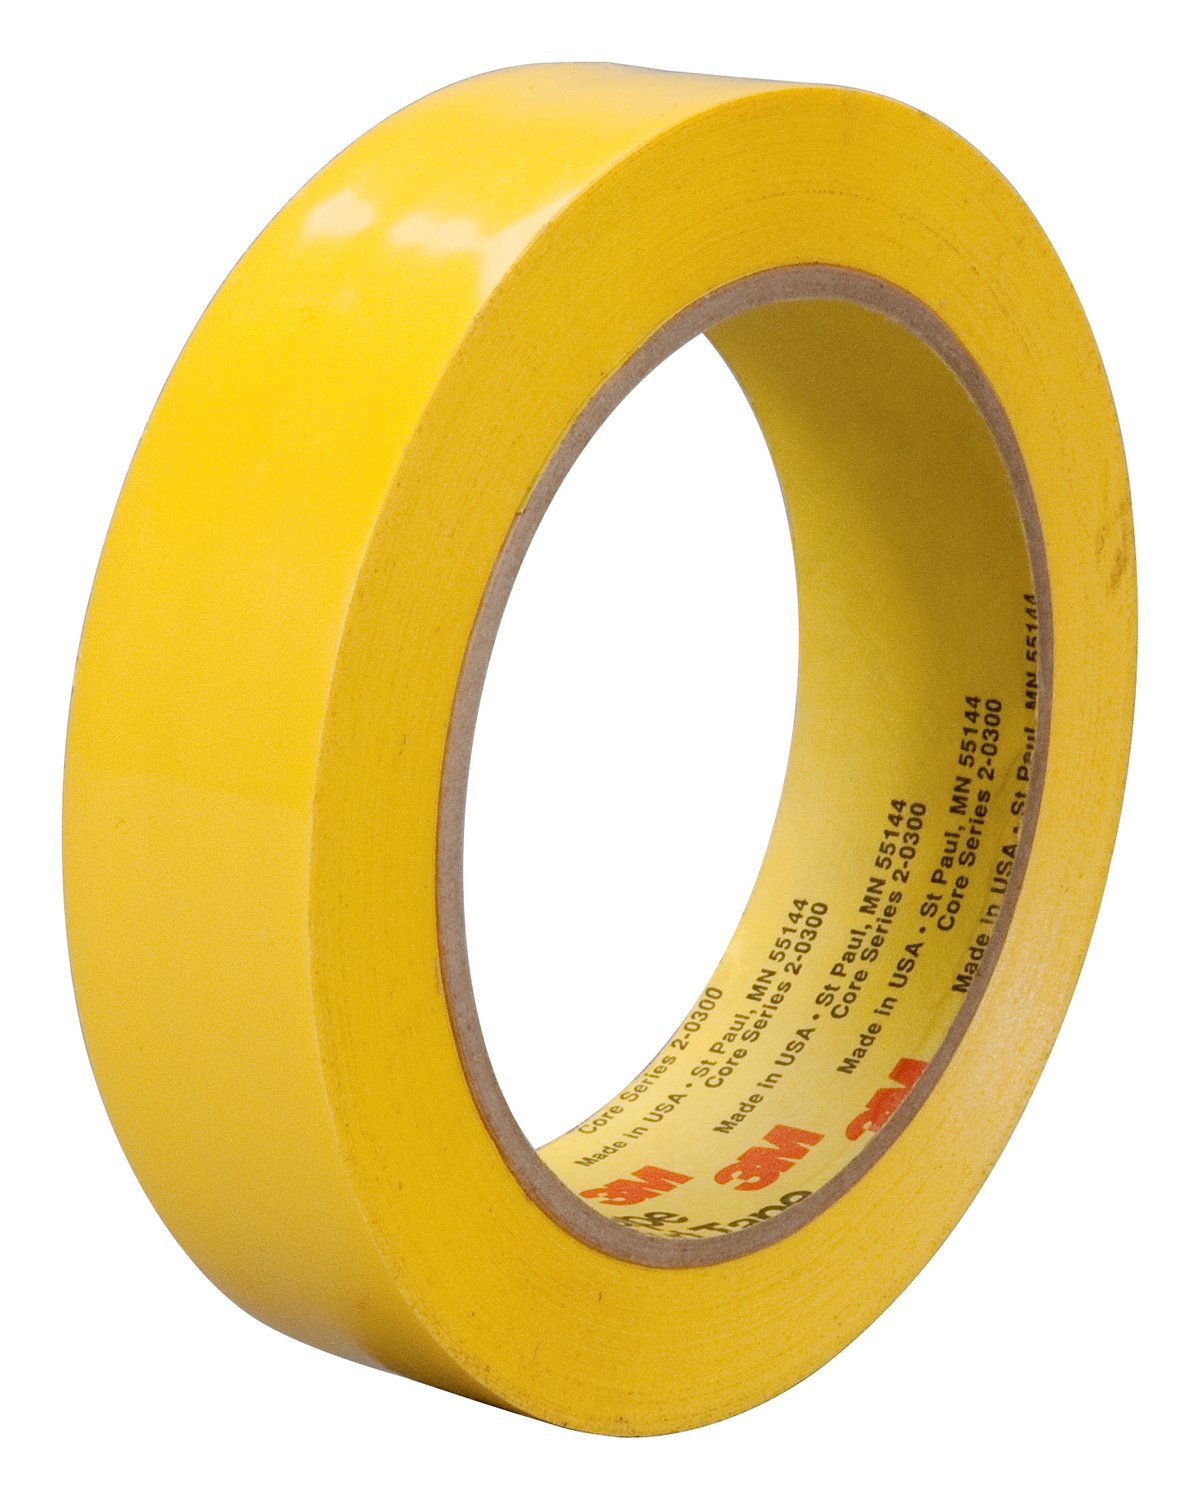 7010312449 - 3M Polyethylene Tape 483, Yellow, 2 in x 36 yd, 5.0 mil, 24 rolls per
case, Individually Wrapped Conveniently Packaged